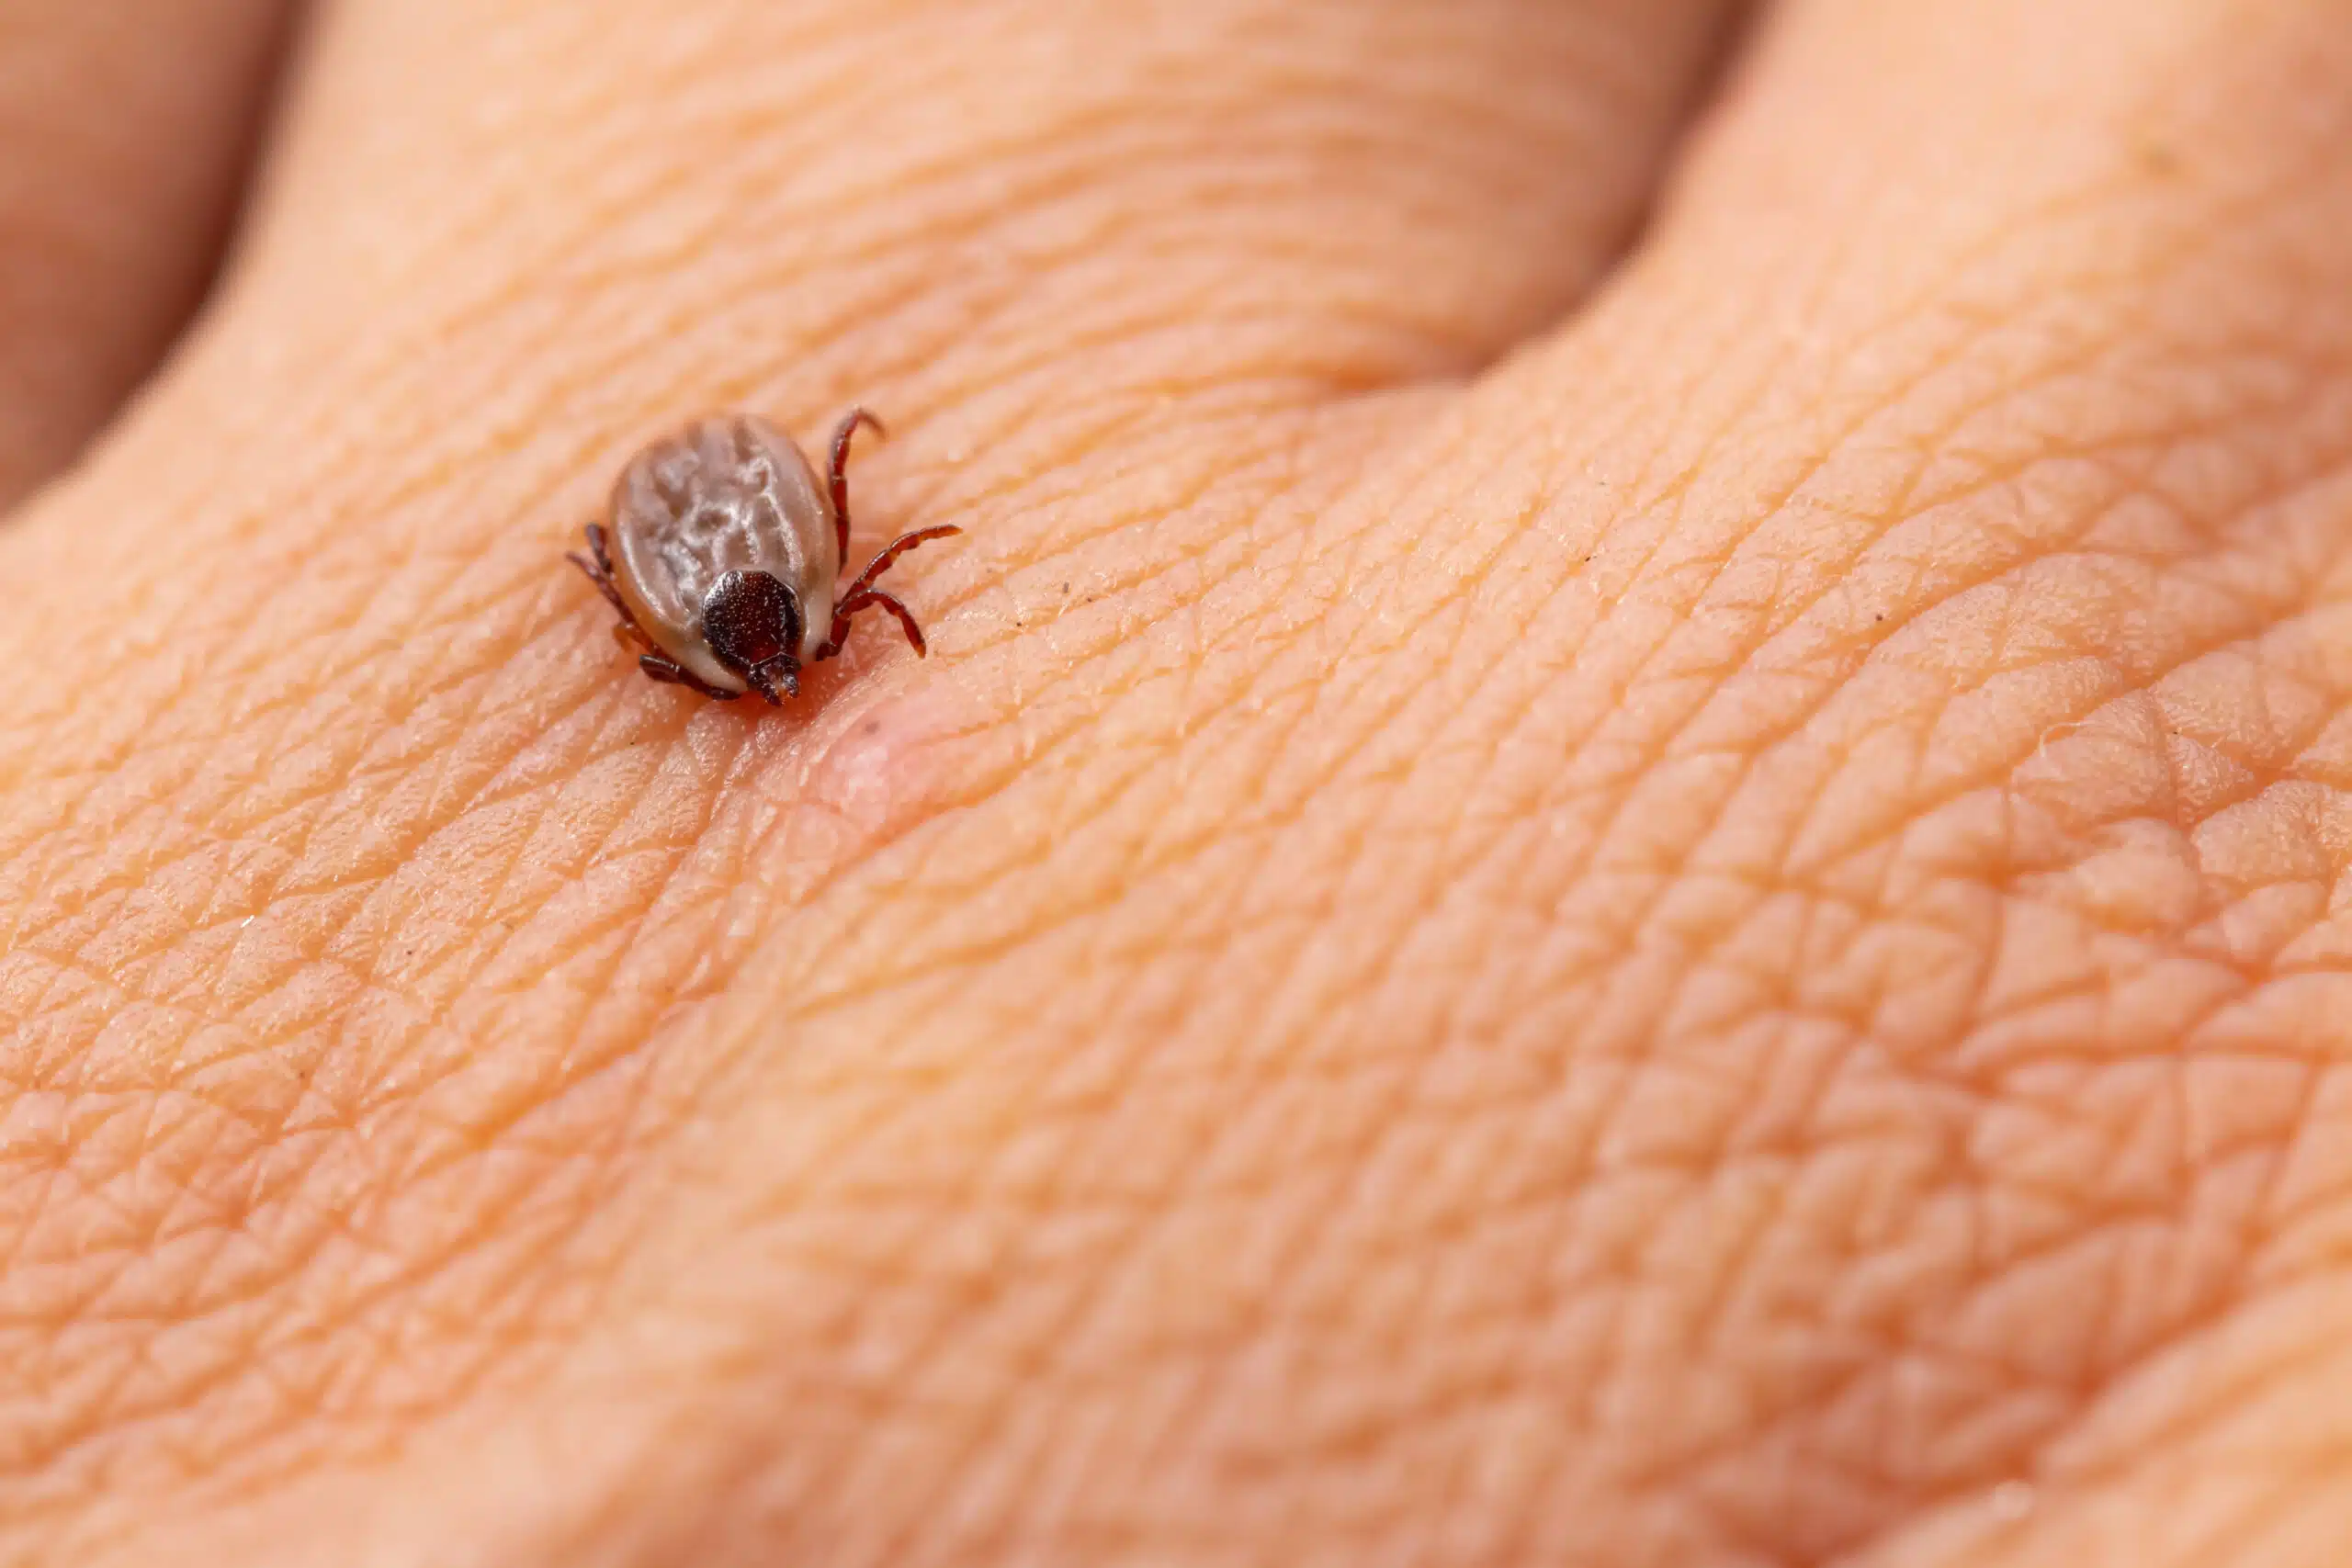 How to Properly Remove a Tick in Massachusetts